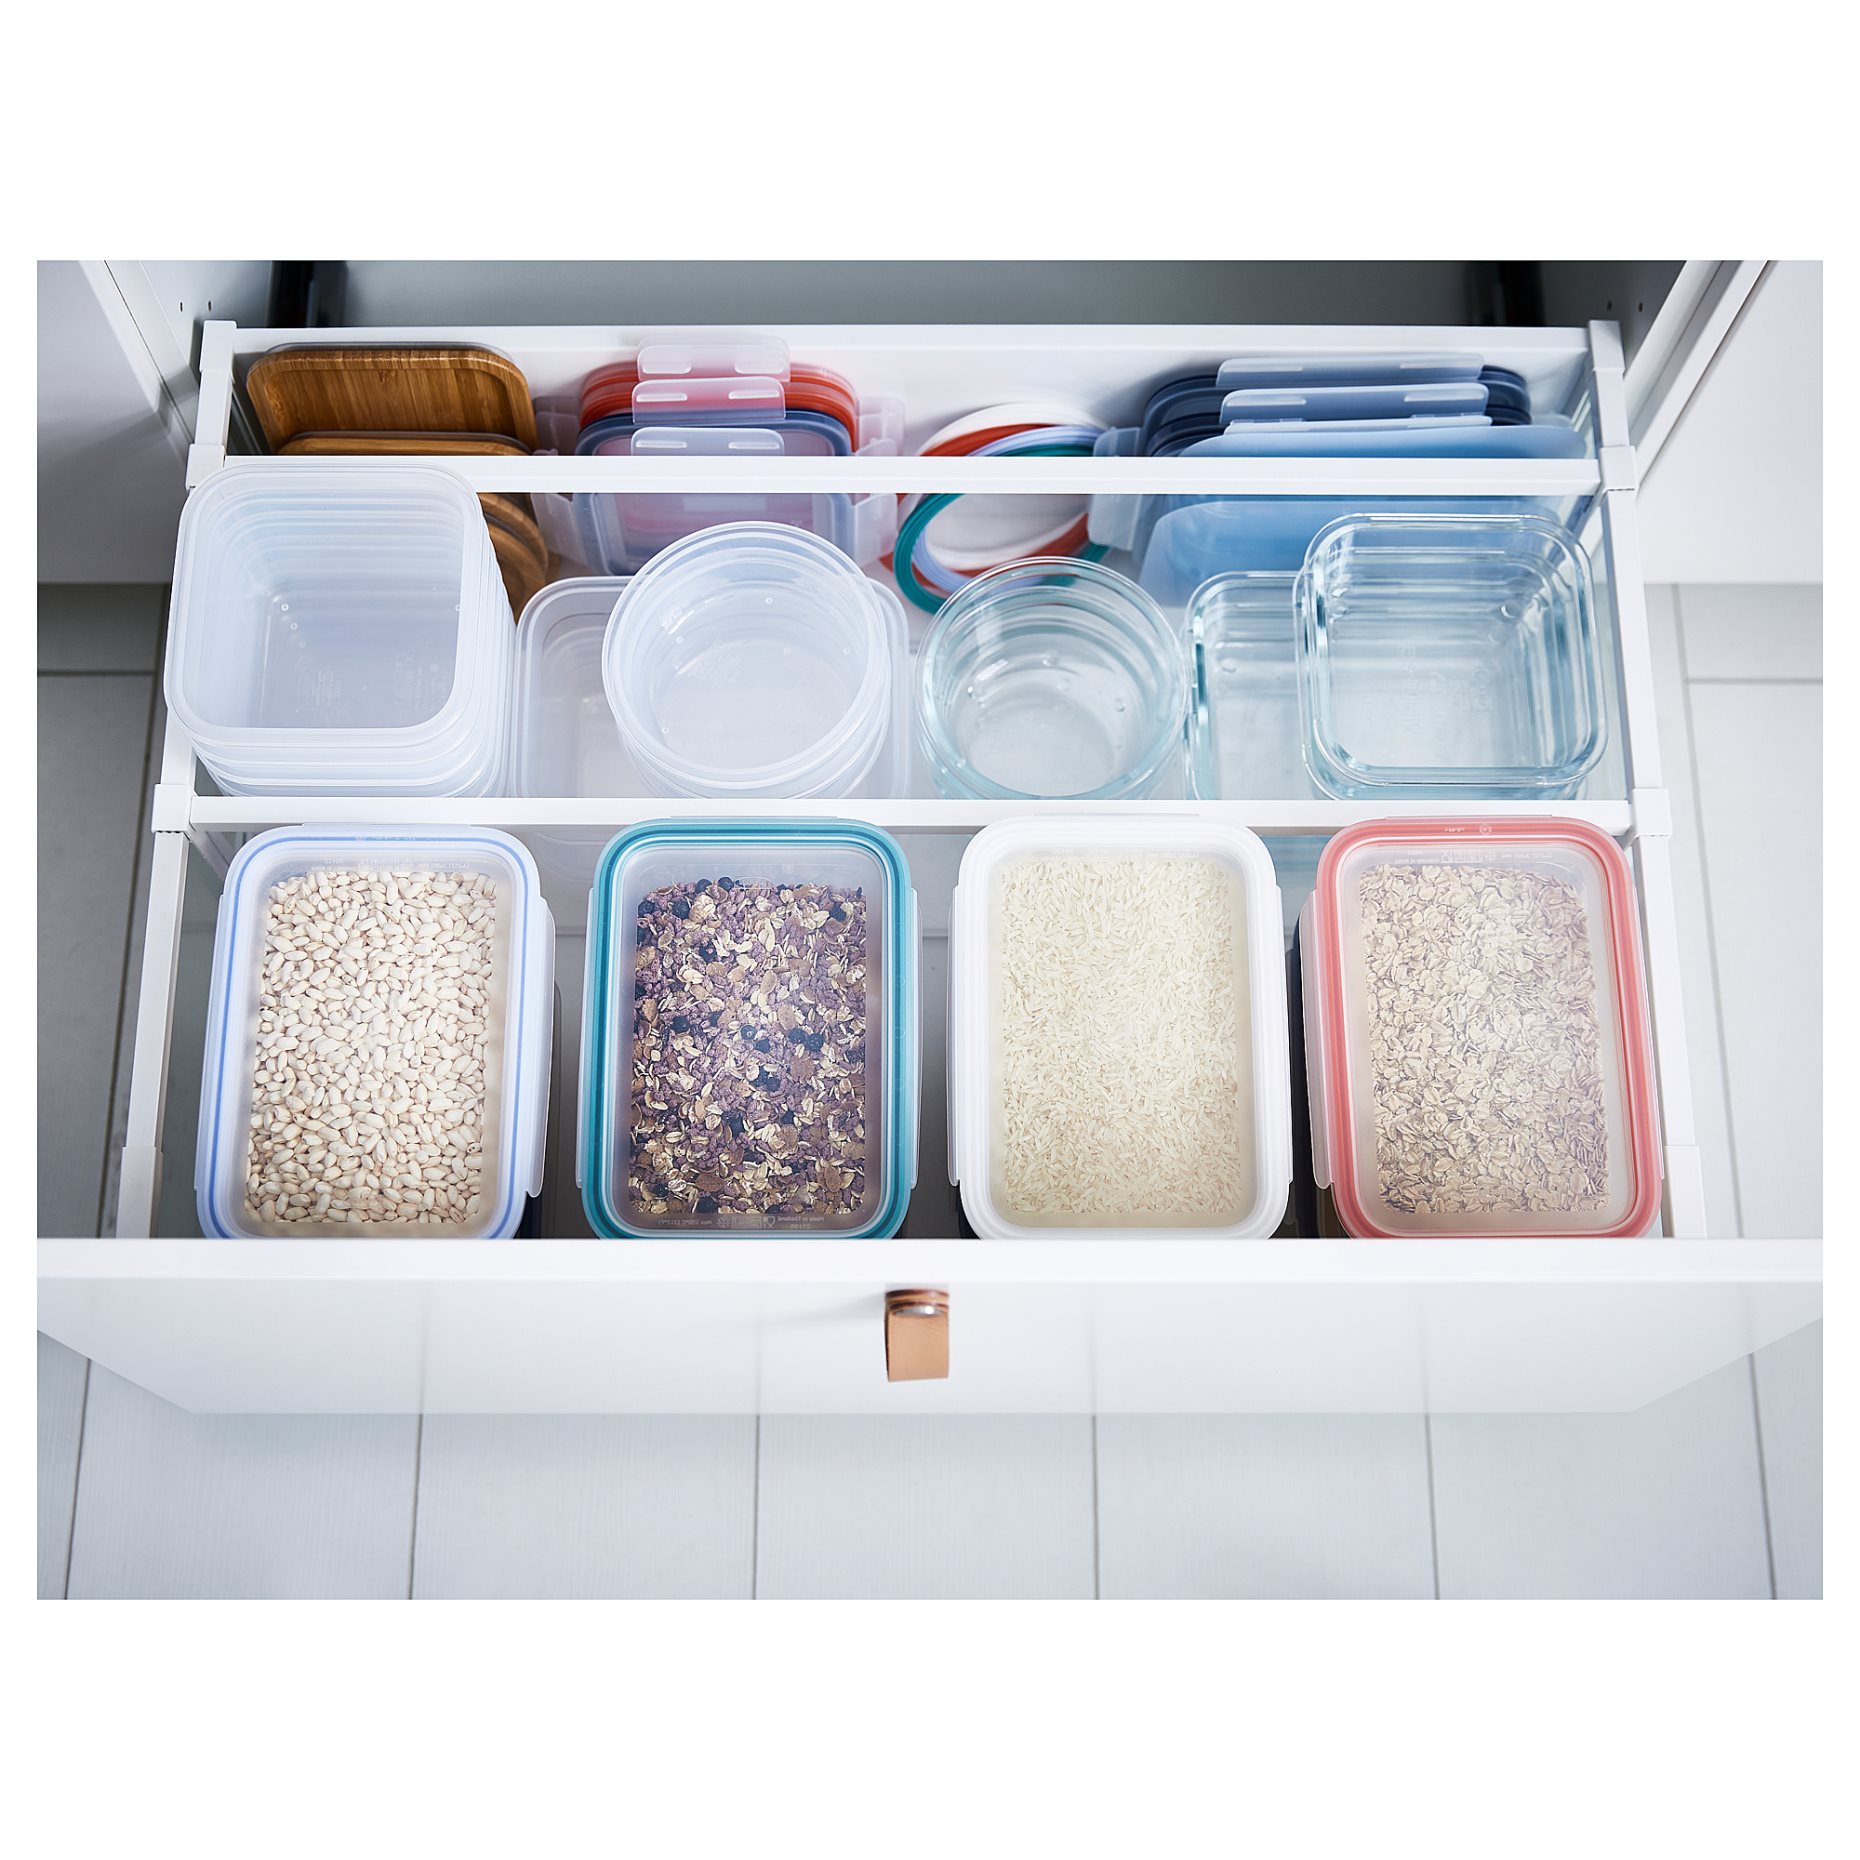 IKEA 365+, food container 3 pack, 750 ml, 604.521.74